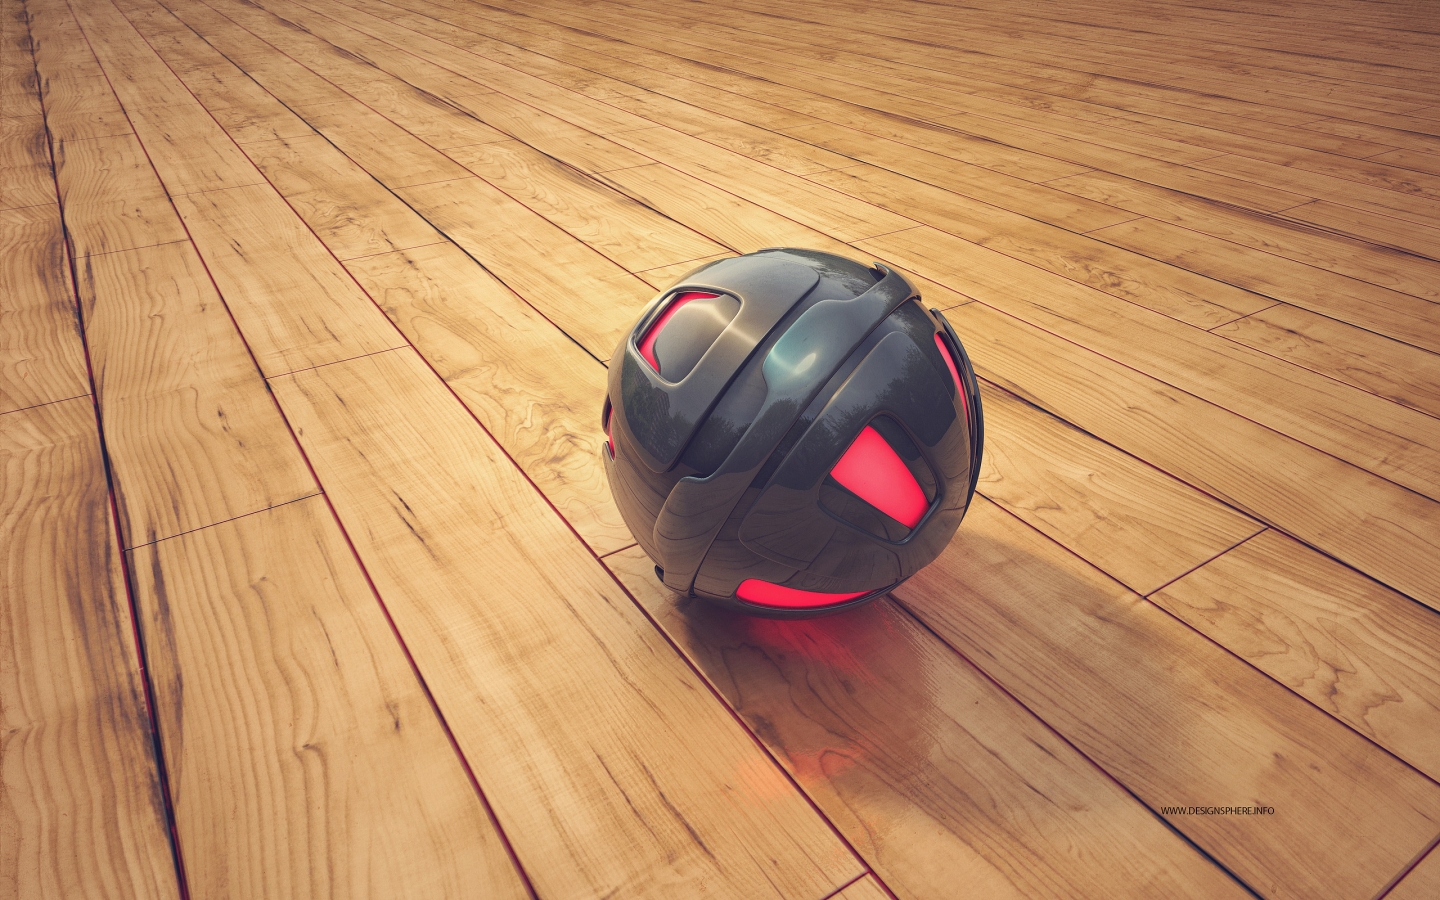 Sphere for 1440 x 900 widescreen resolution